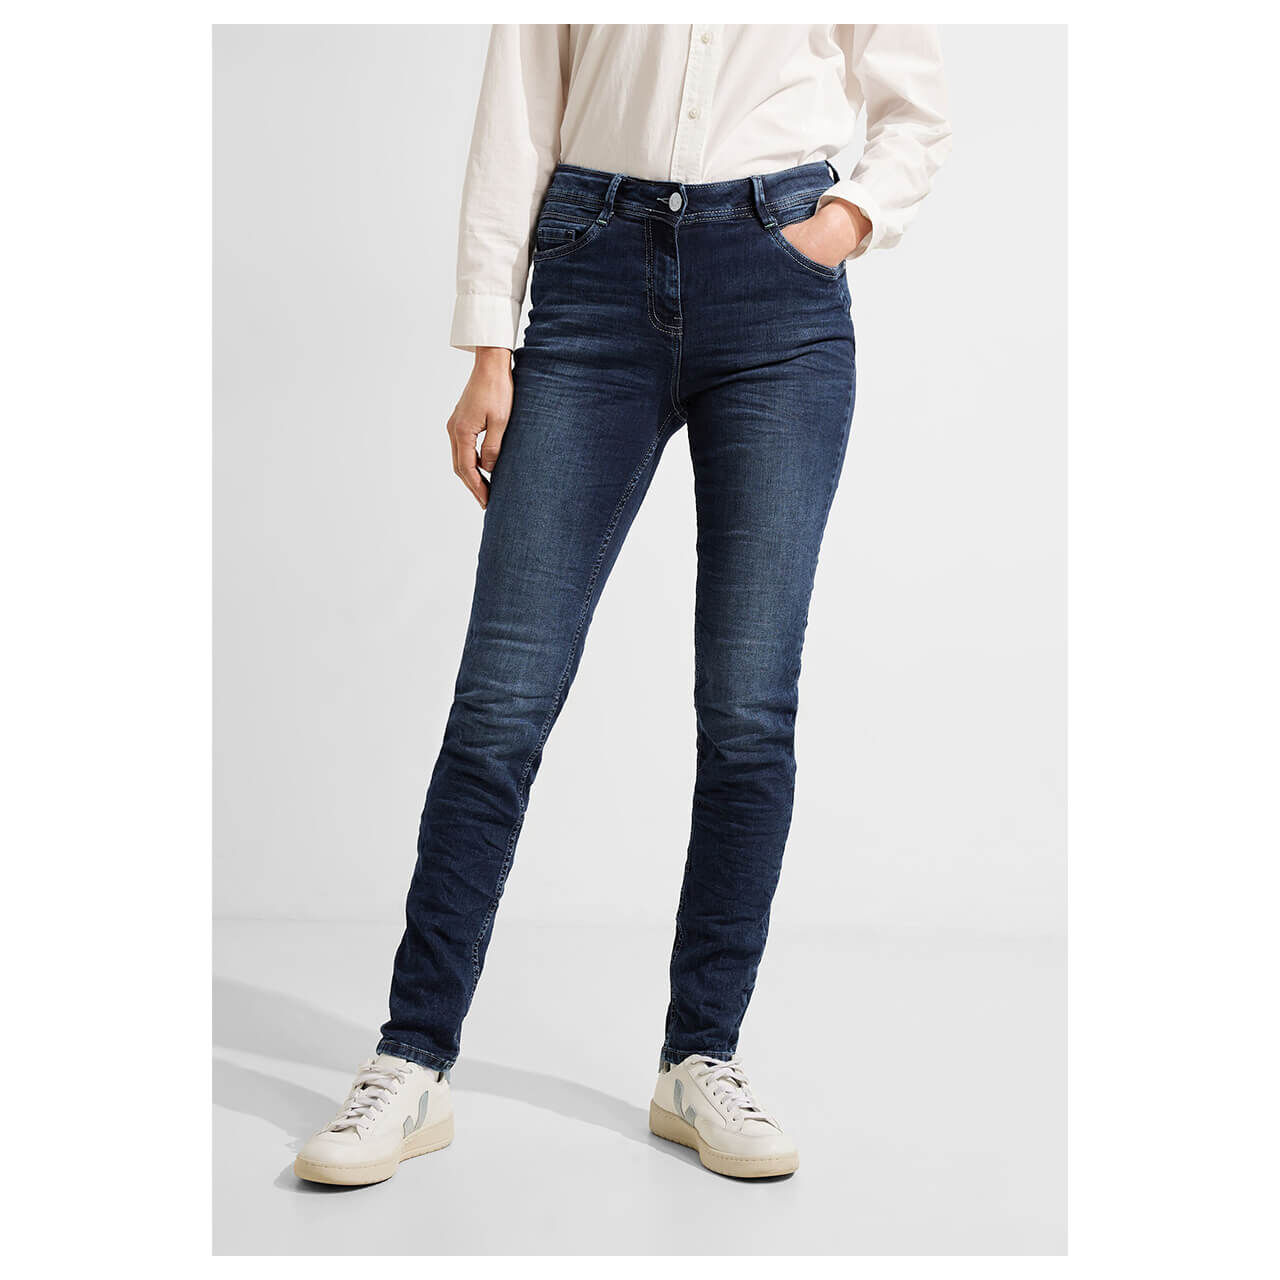 Cecil Jeans Vicky mid blue used wash